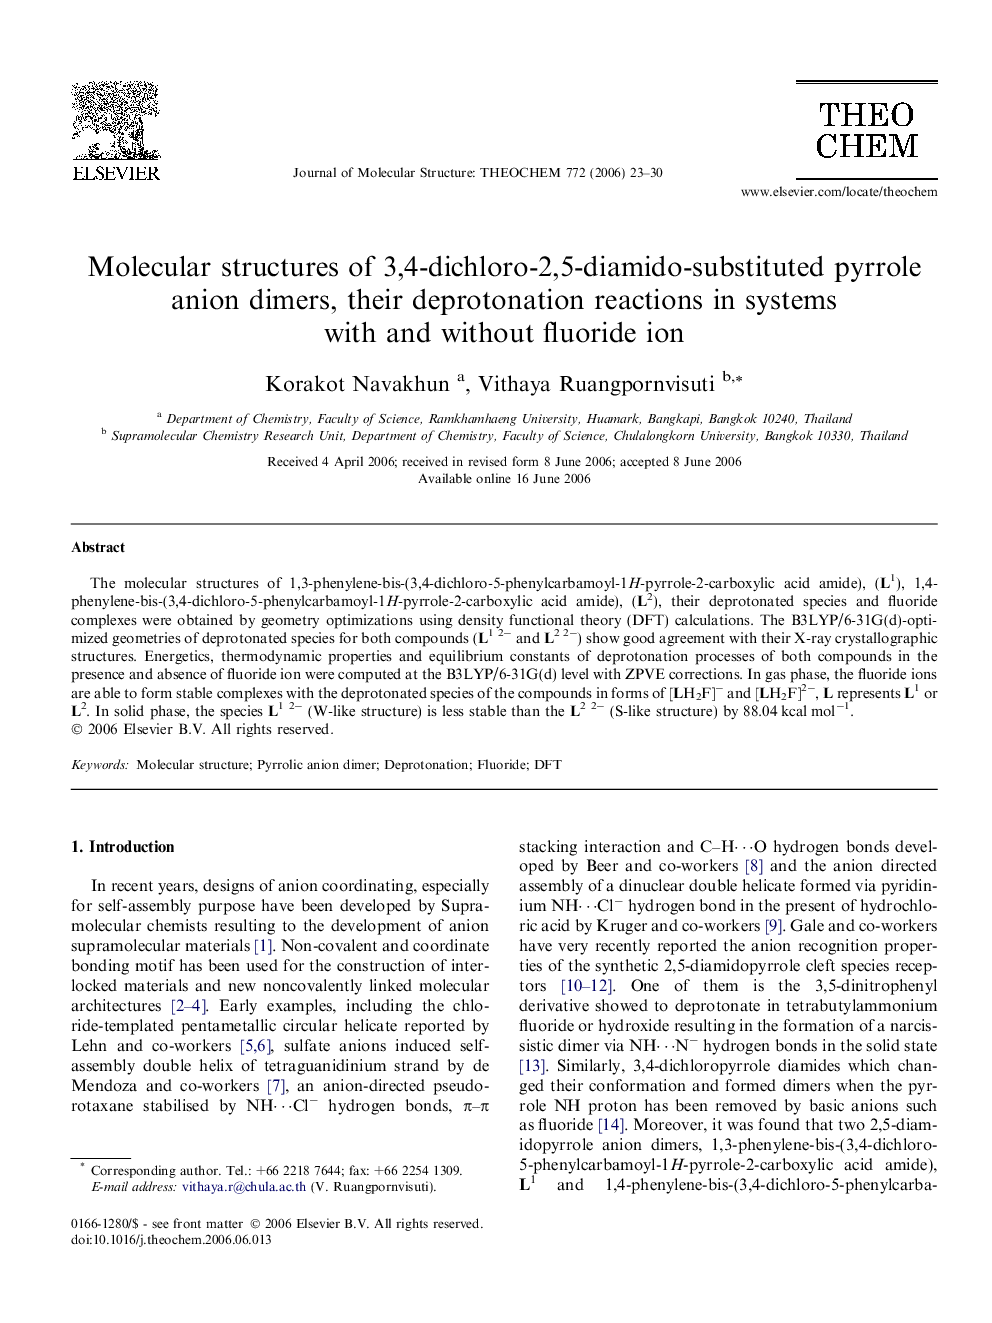 Molecular structures of 3,4-dichloro-2,5-diamido-substituted pyrrole anion dimers, their deprotonation reactions in systems with and without fluoride ion